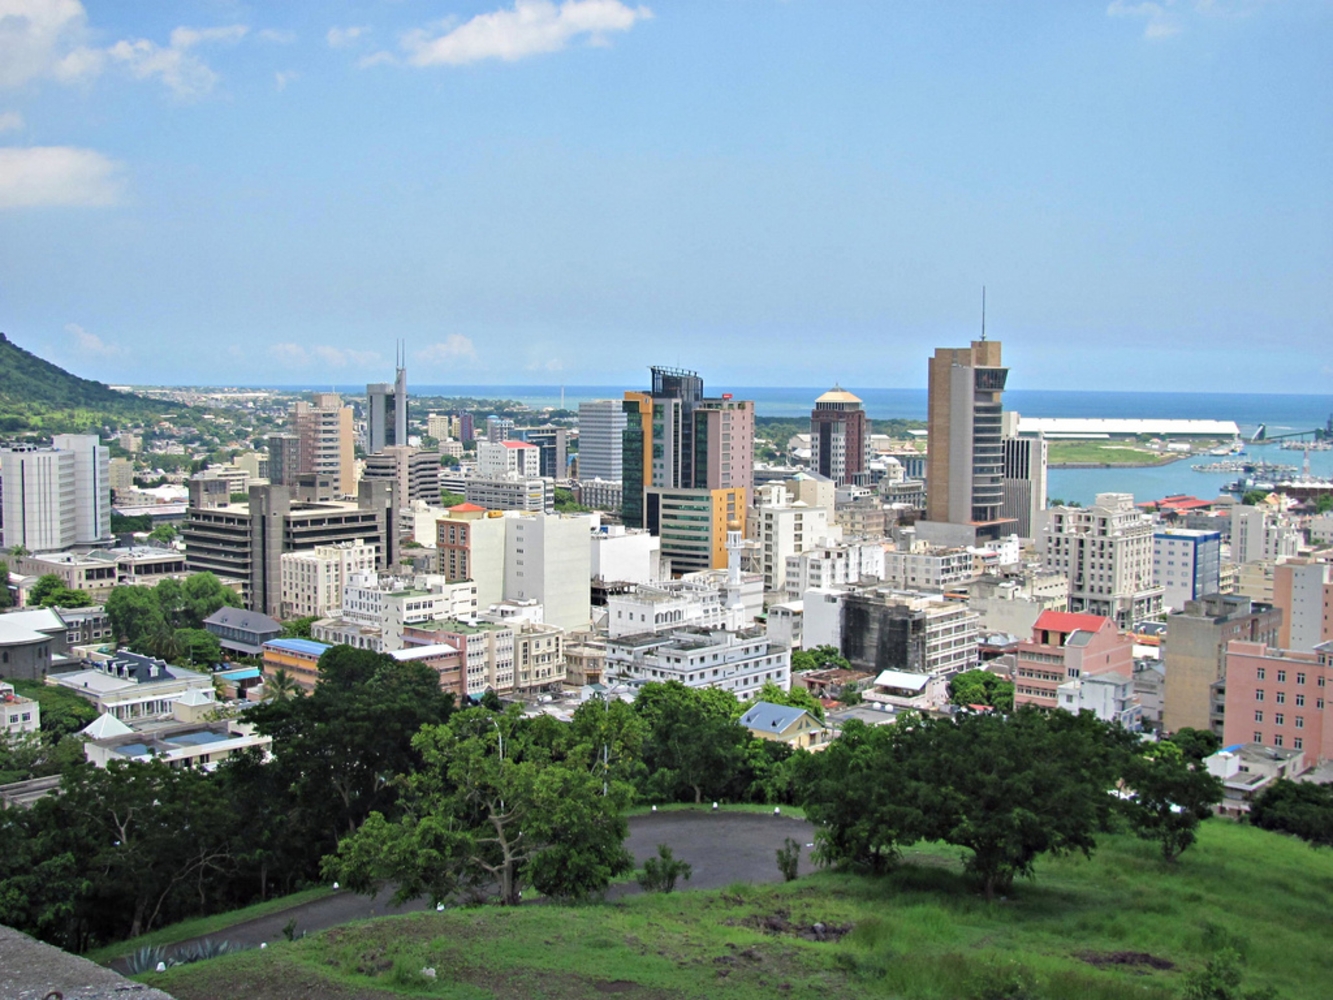 Mauritius tries to brush up the reputation of its offshore financial sector